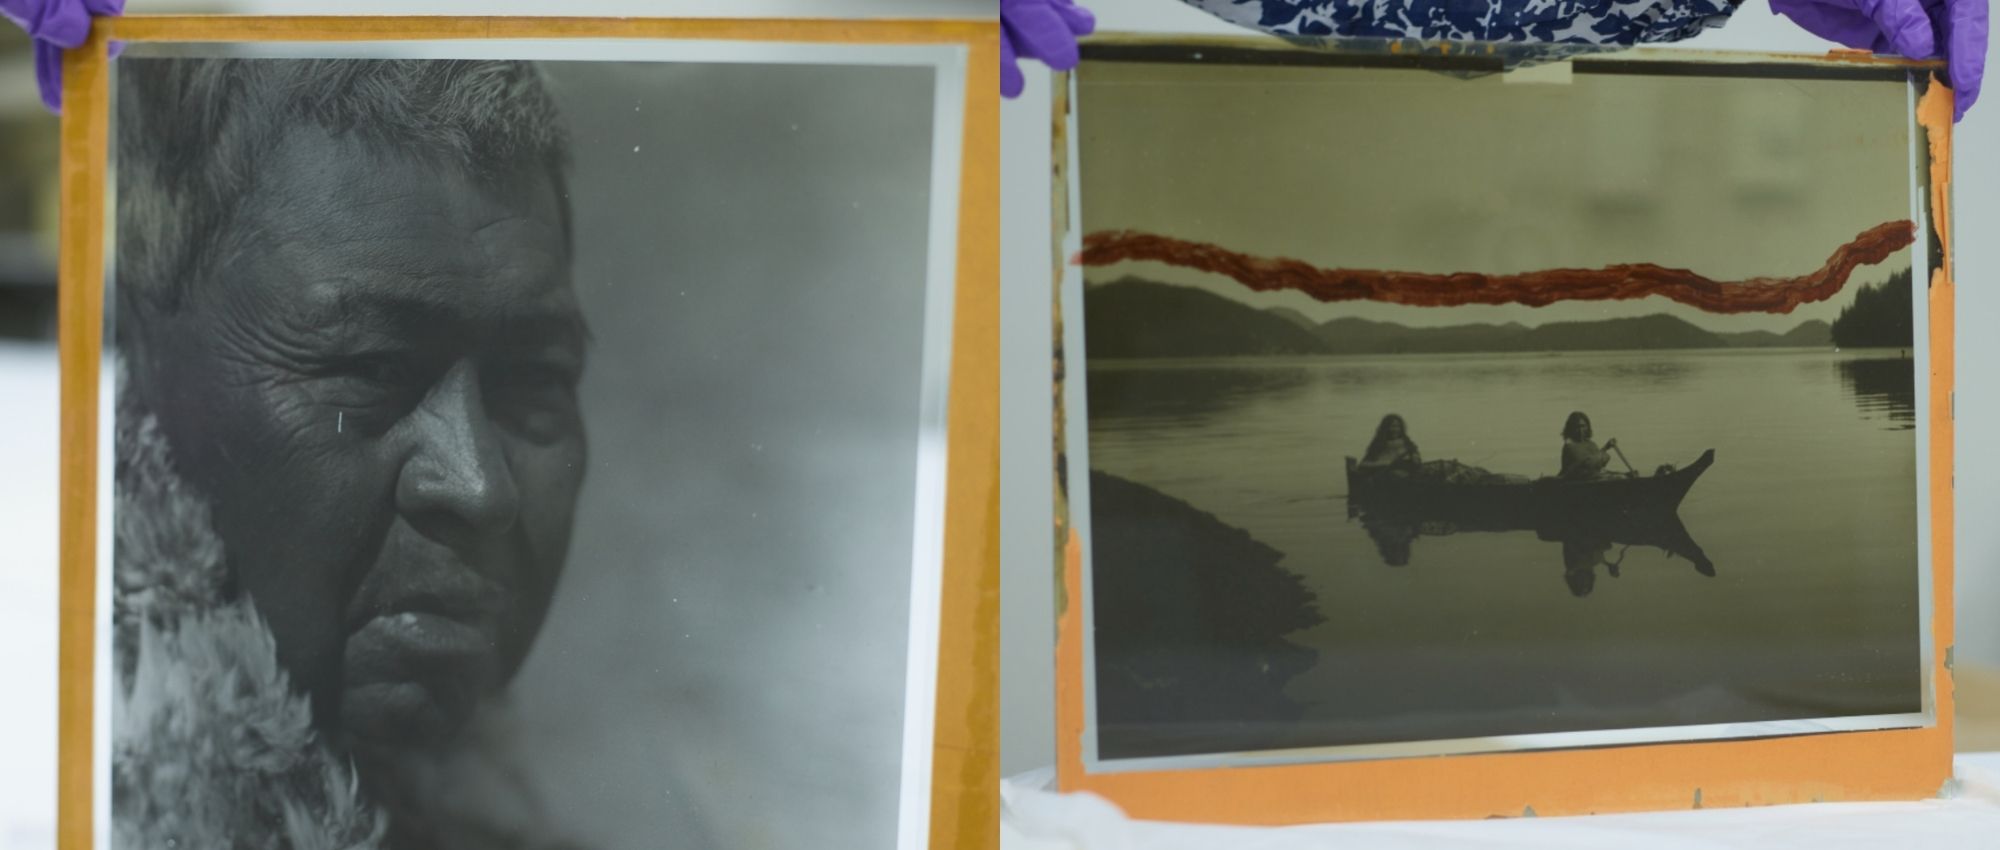 At left, an portrait of an Indigenous person, at right, an image of two Indegenous people rowing in a canoe on a lake. 